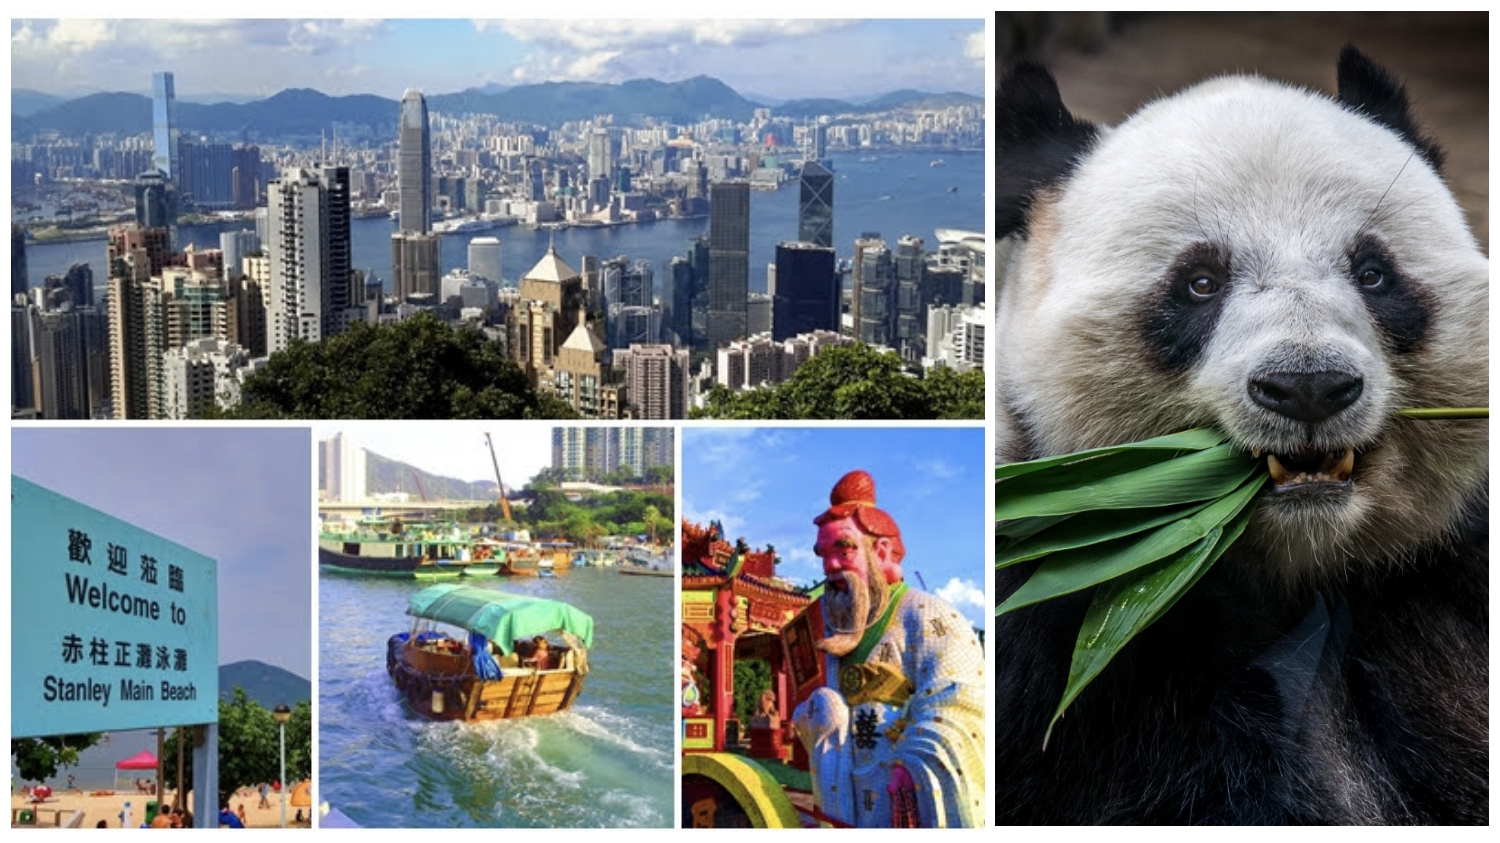 After visiting the highlights during Hong Kong Island Highlights private car tour, driver Sam can send you to Ocean Park to say hello to Giant Pandas.